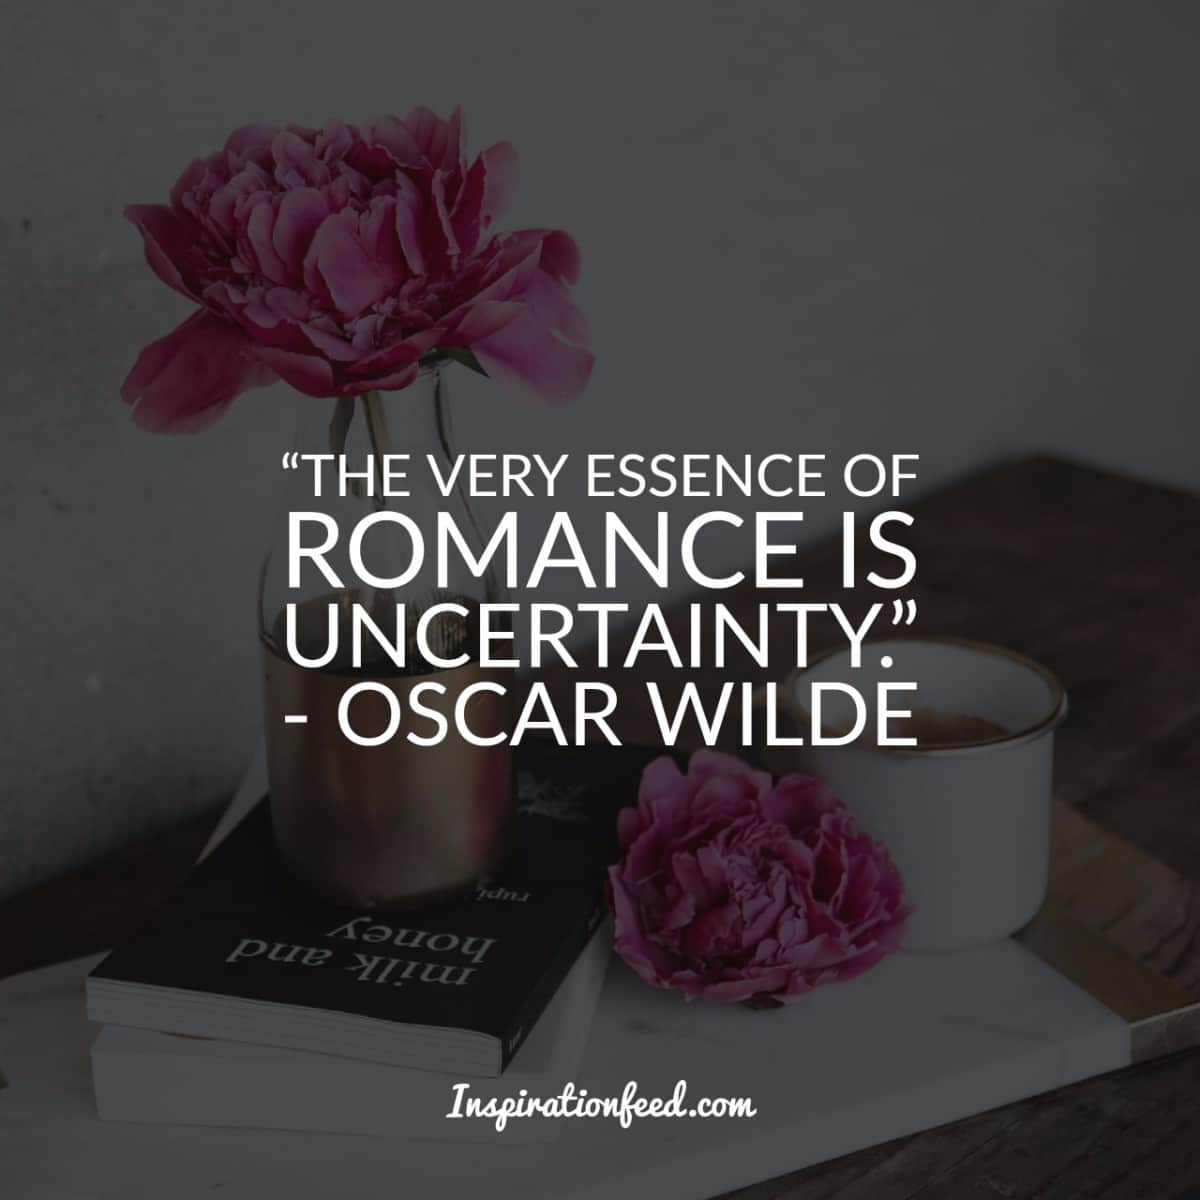 30 Oscar Wilde Quotes about Beauty and Life - Inspirationfeed